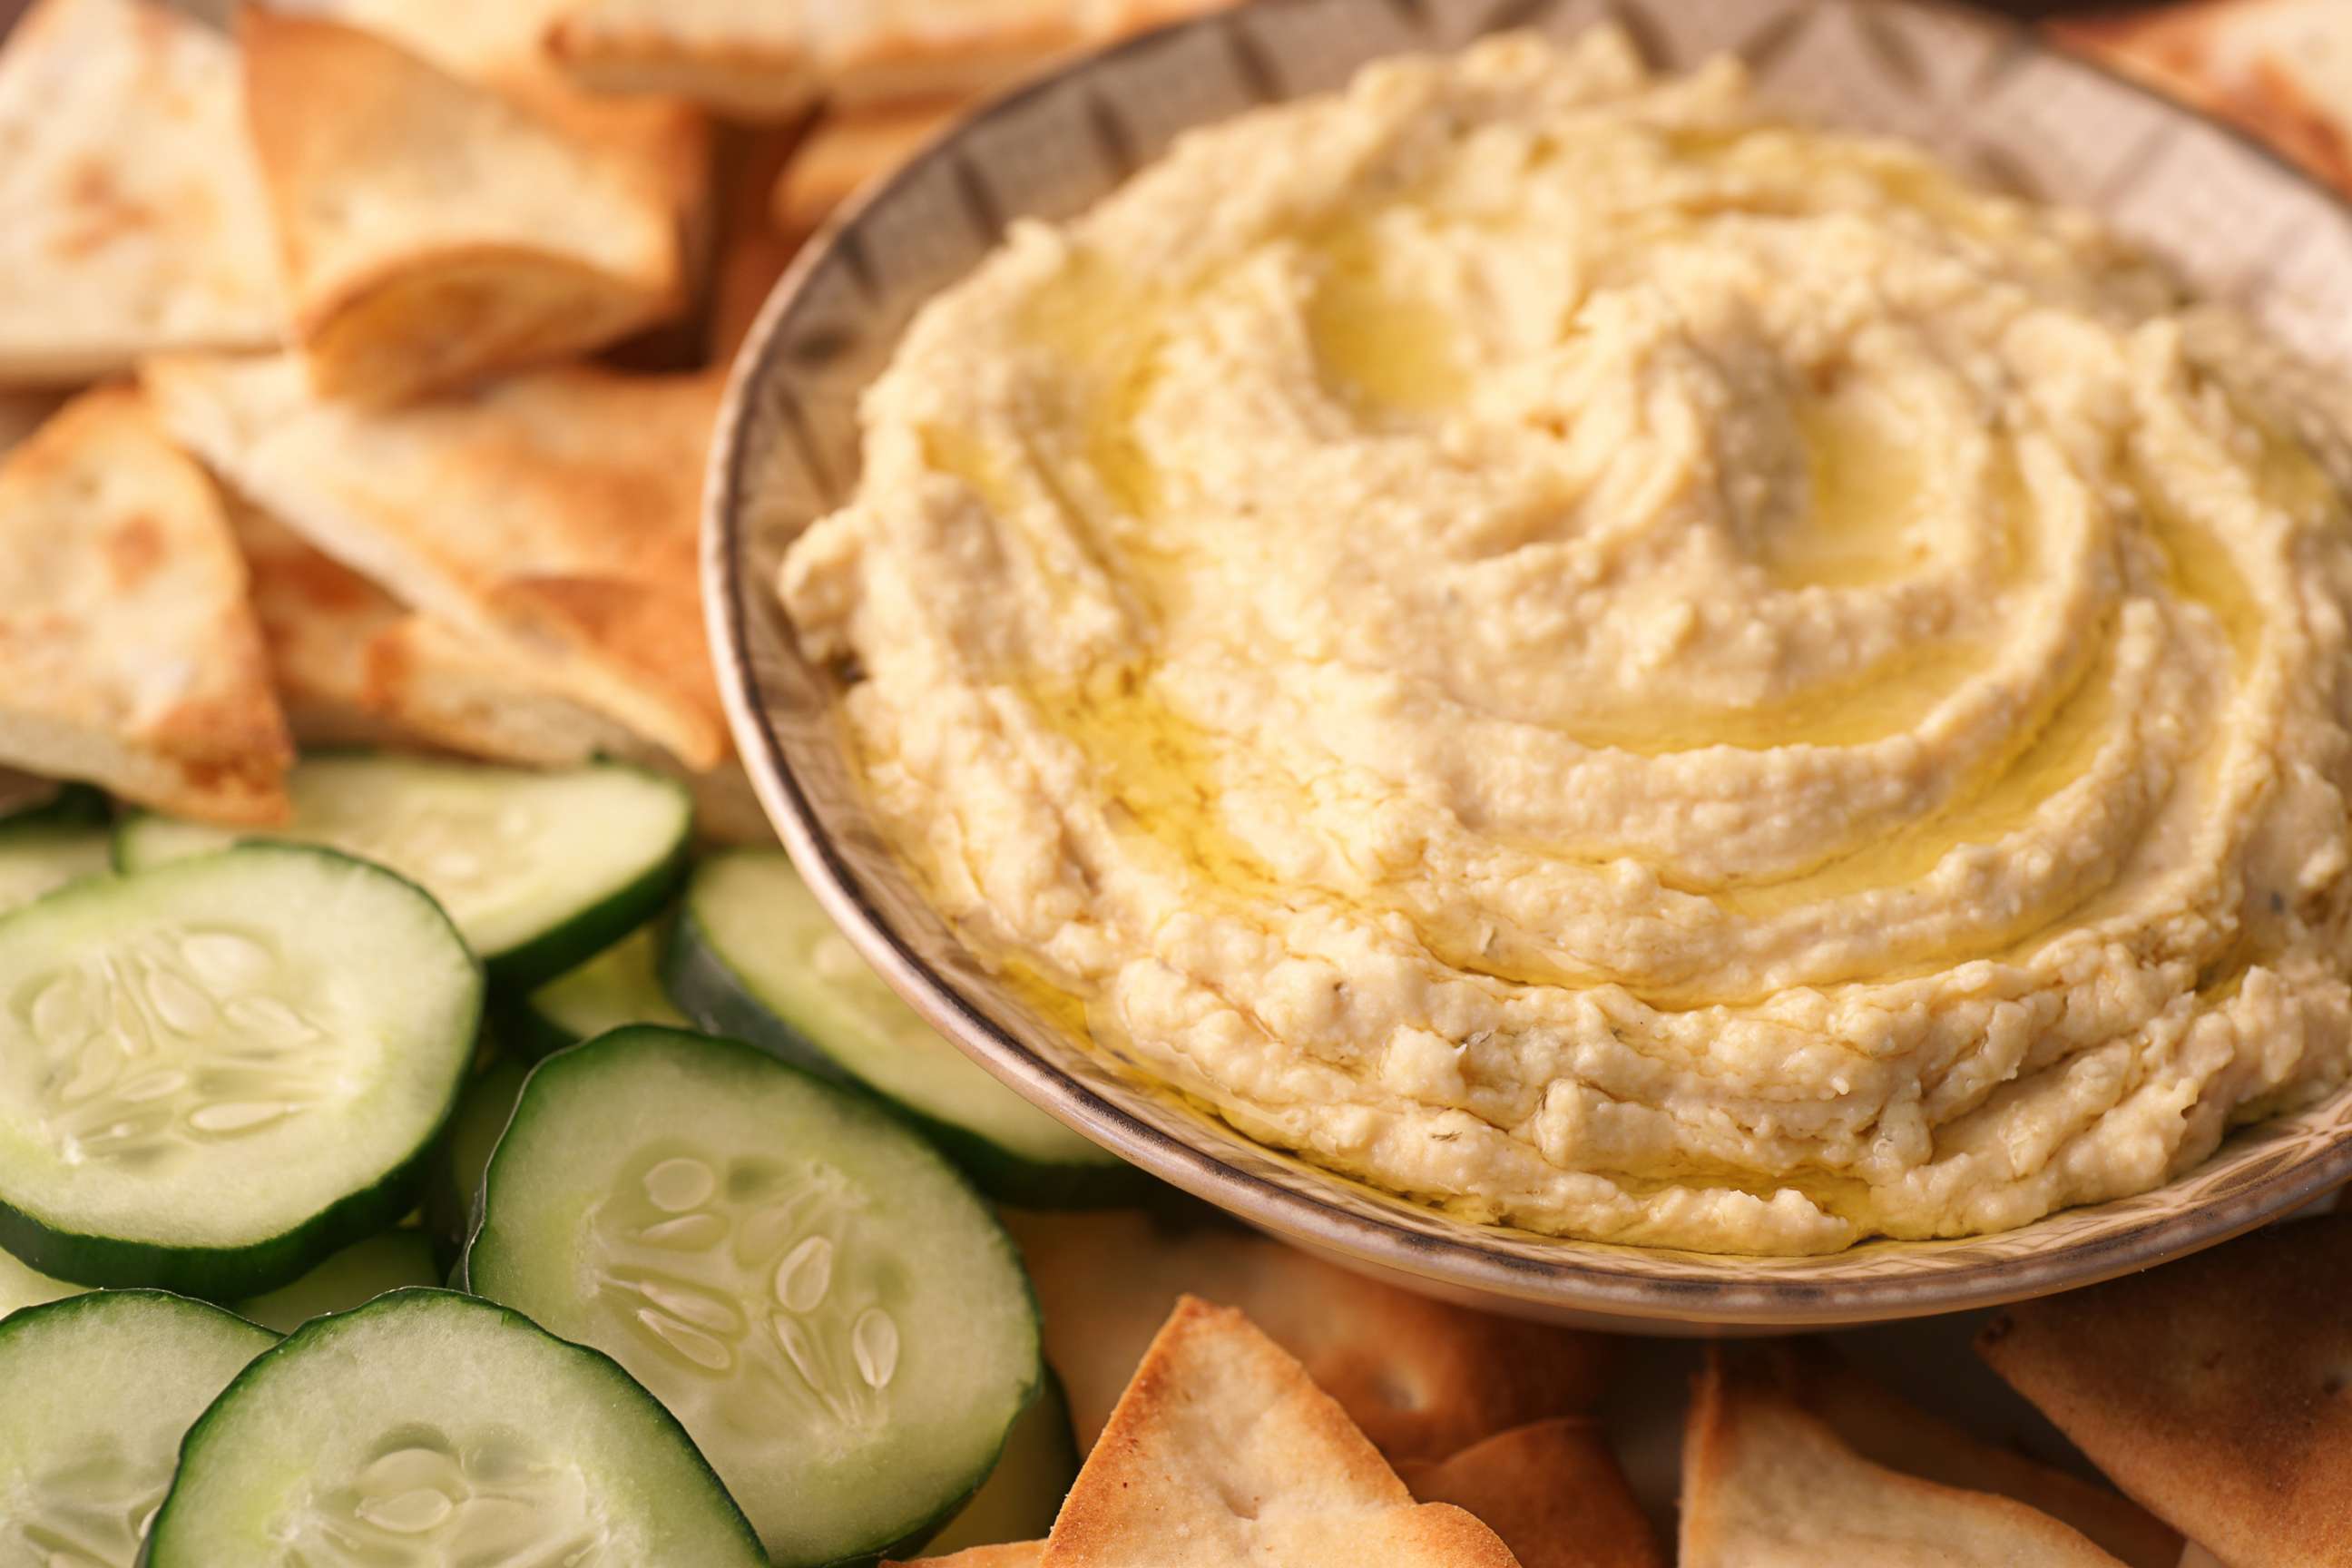 PHOTO: This file photo shows a bowl of hummus served with cucumbers and pita.